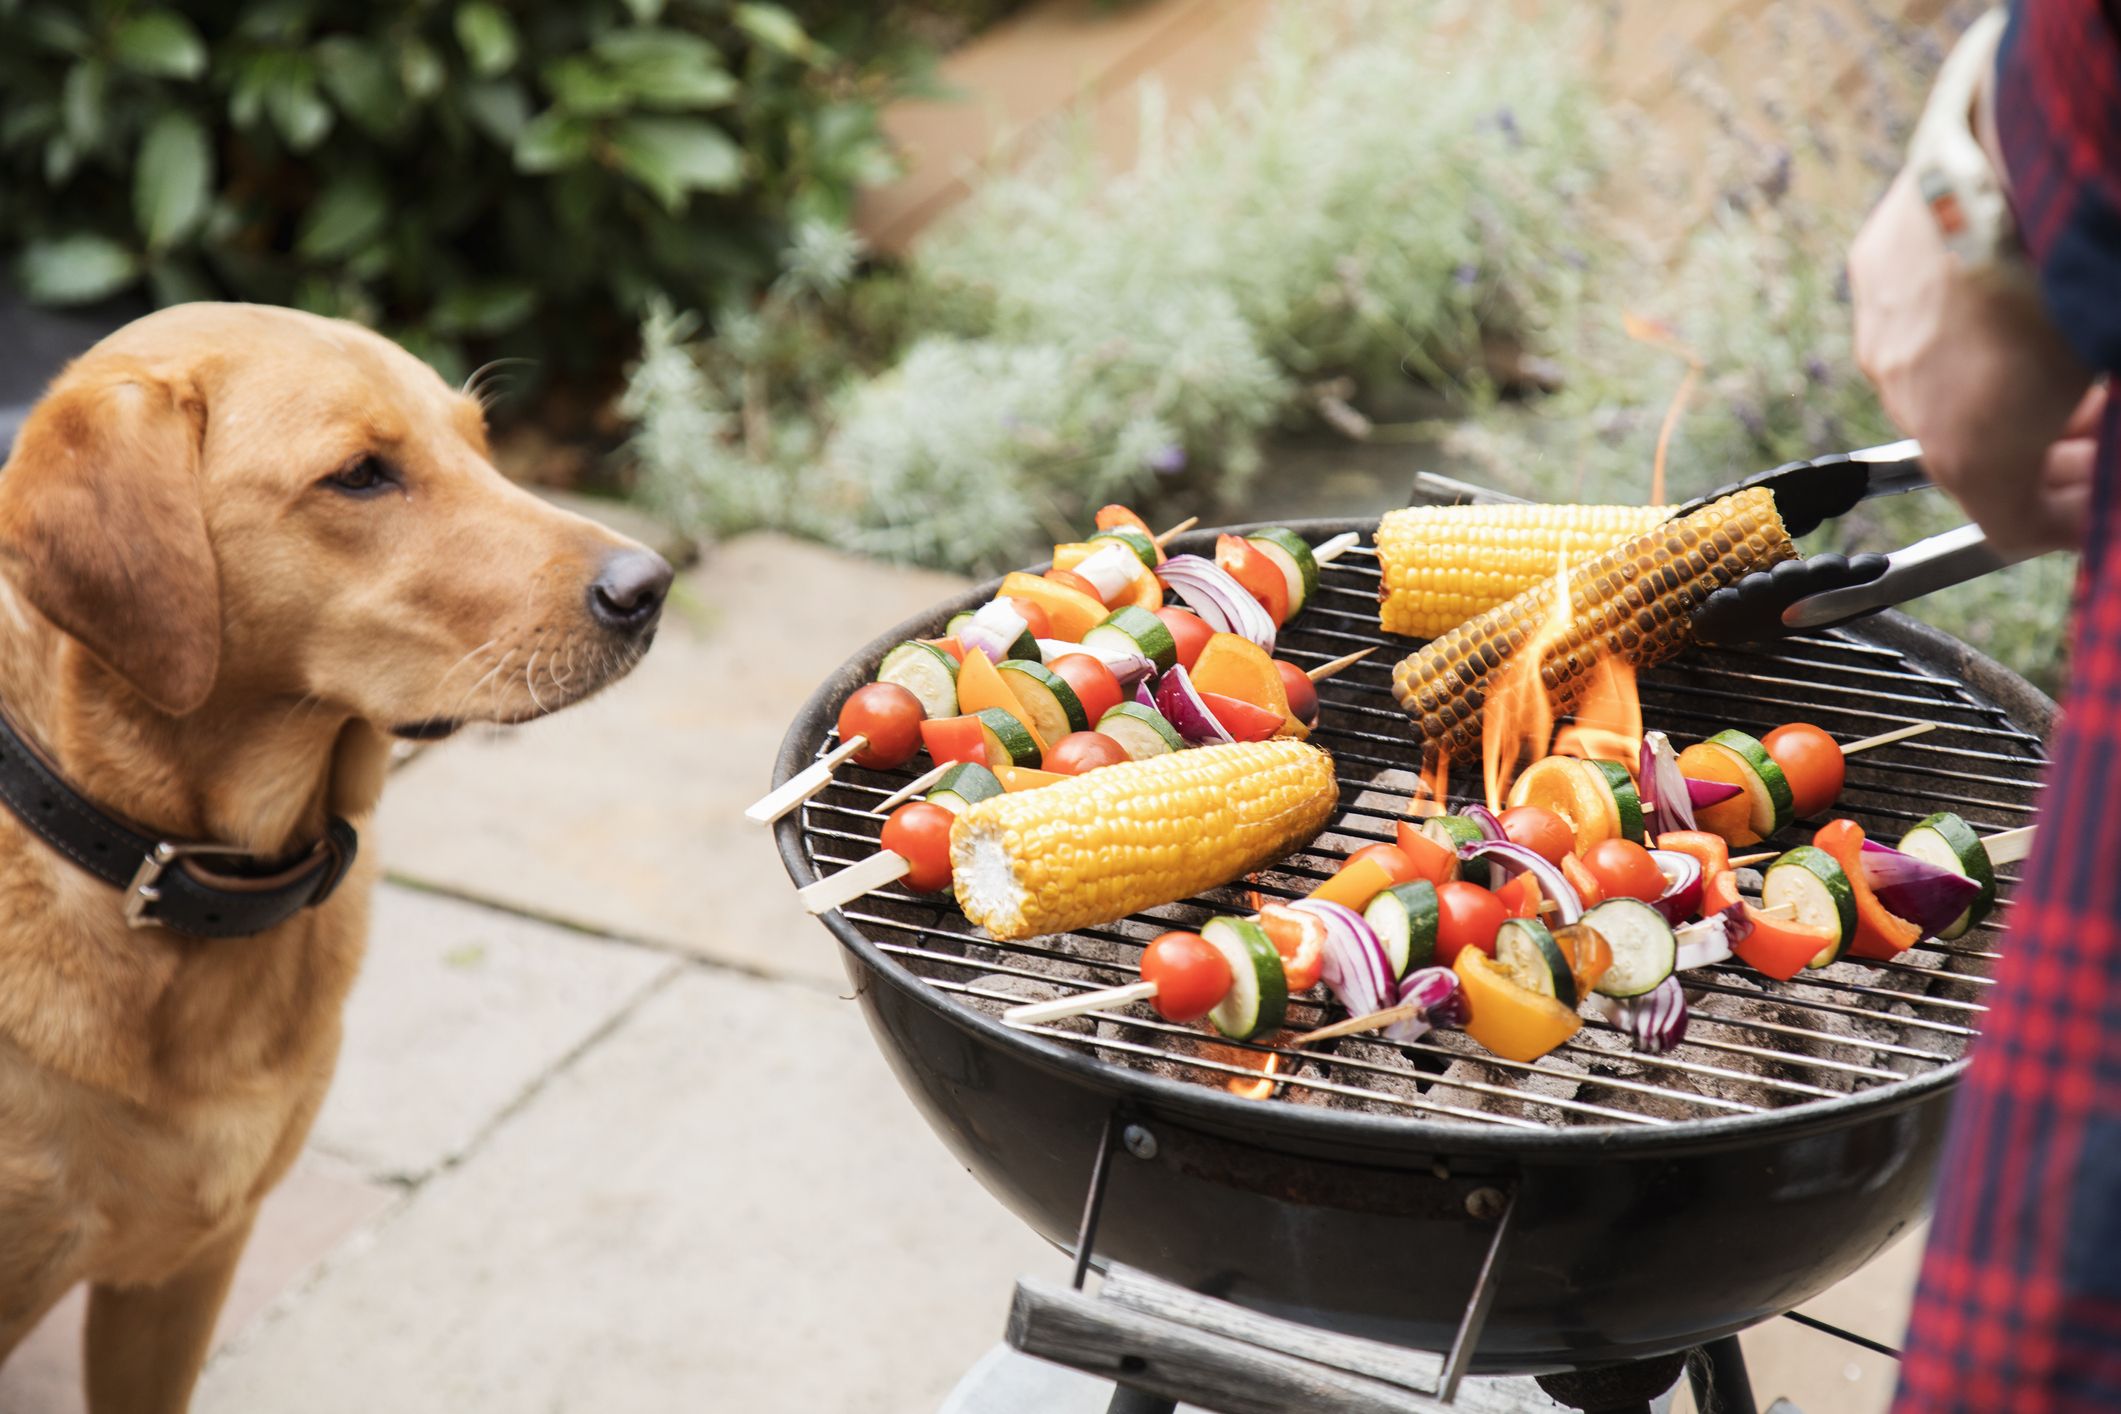 what foods are not safe for dogs